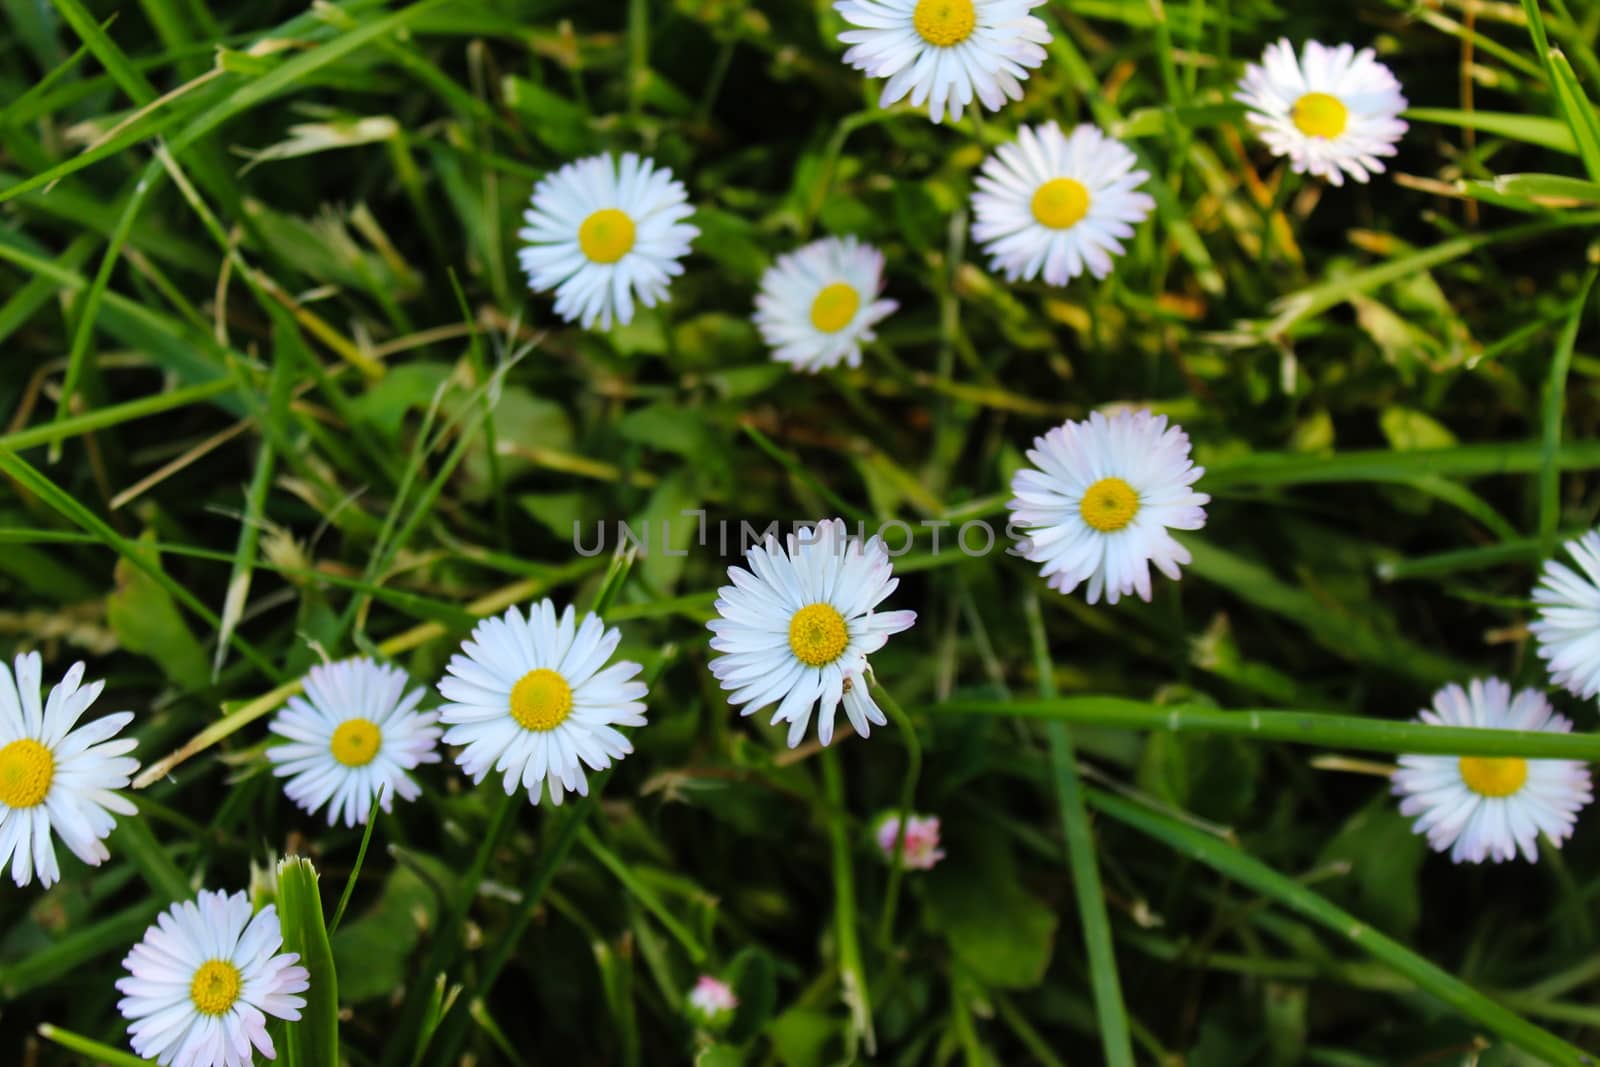 Bellis perennis, daisies in the grass, white flowers with a yellow center. by mahirrov